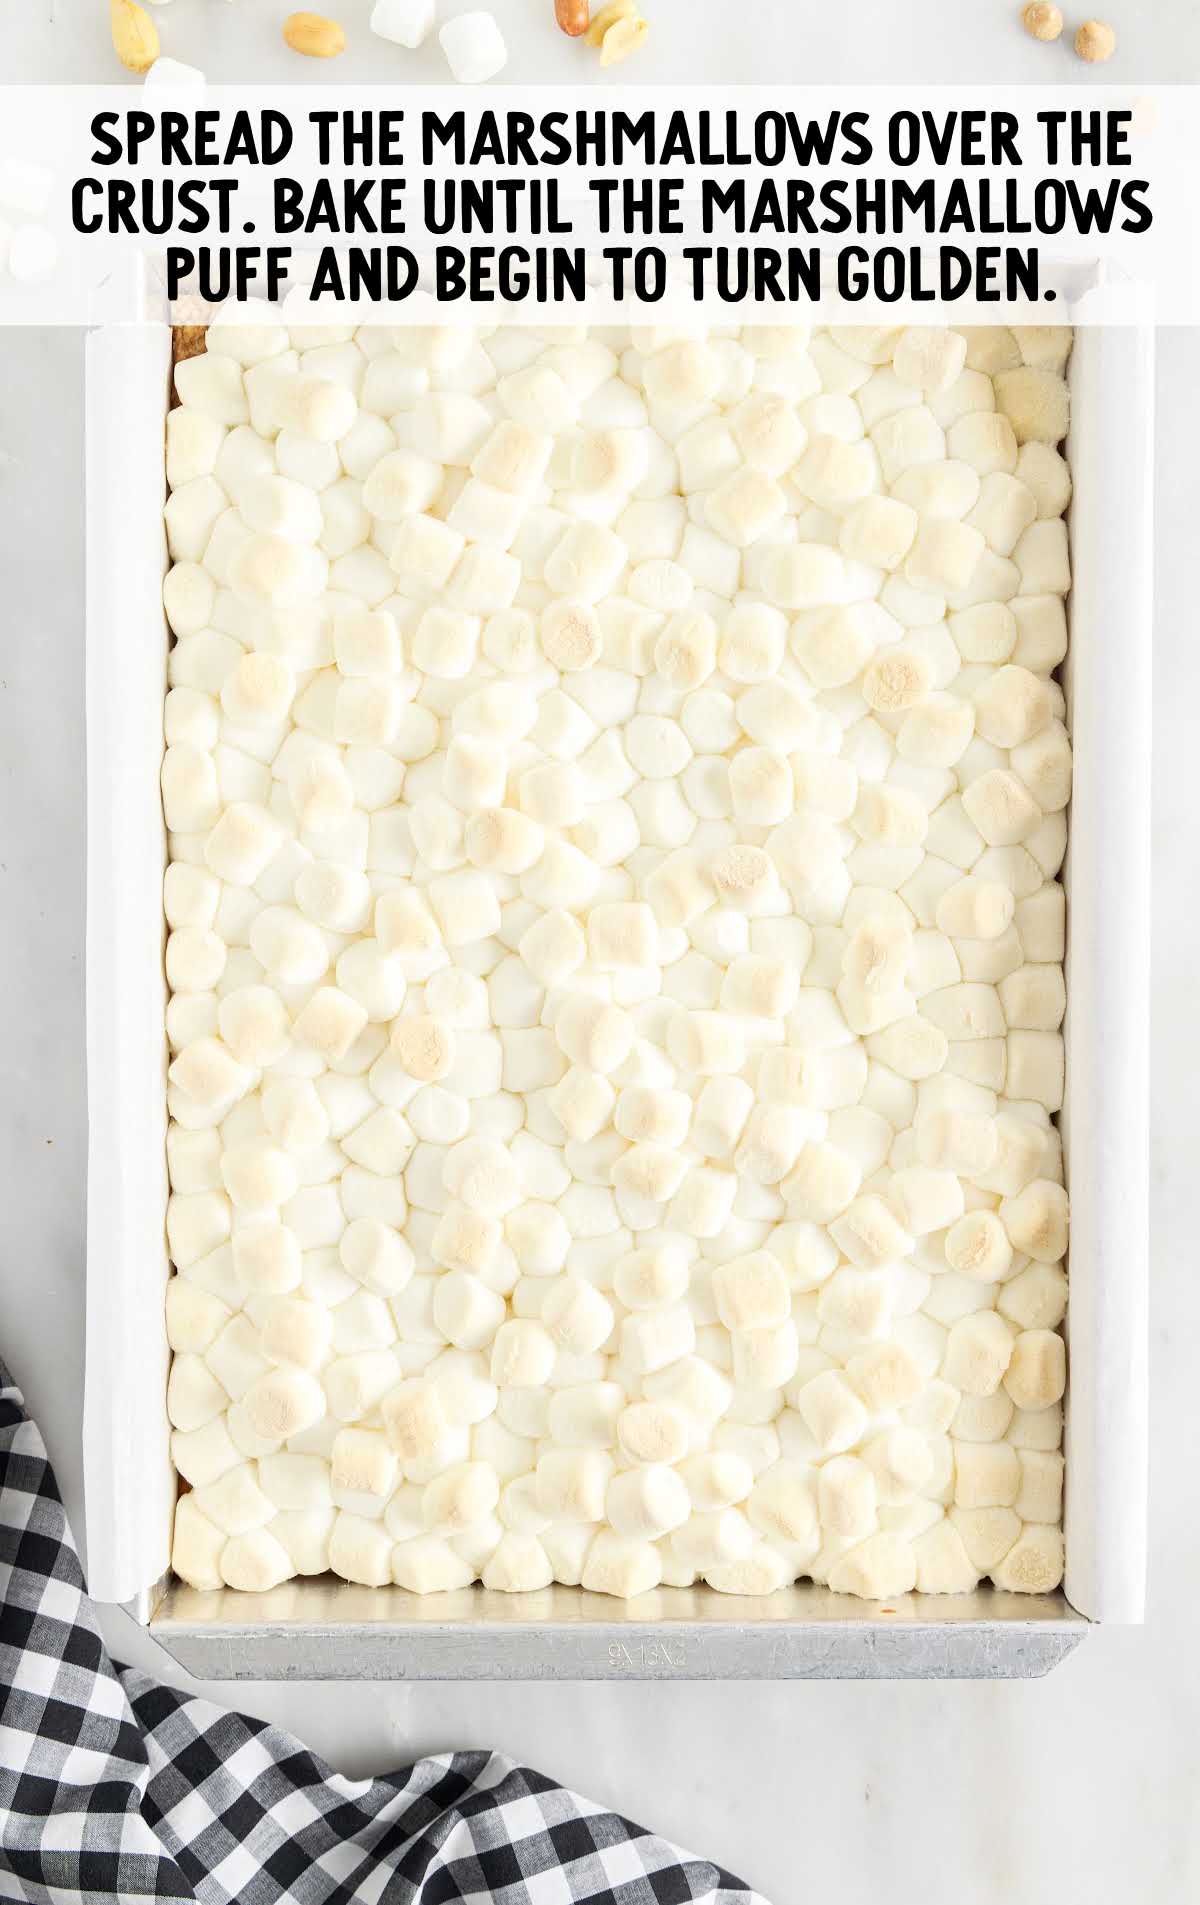 marshmallows spread over the crust in a baking dish